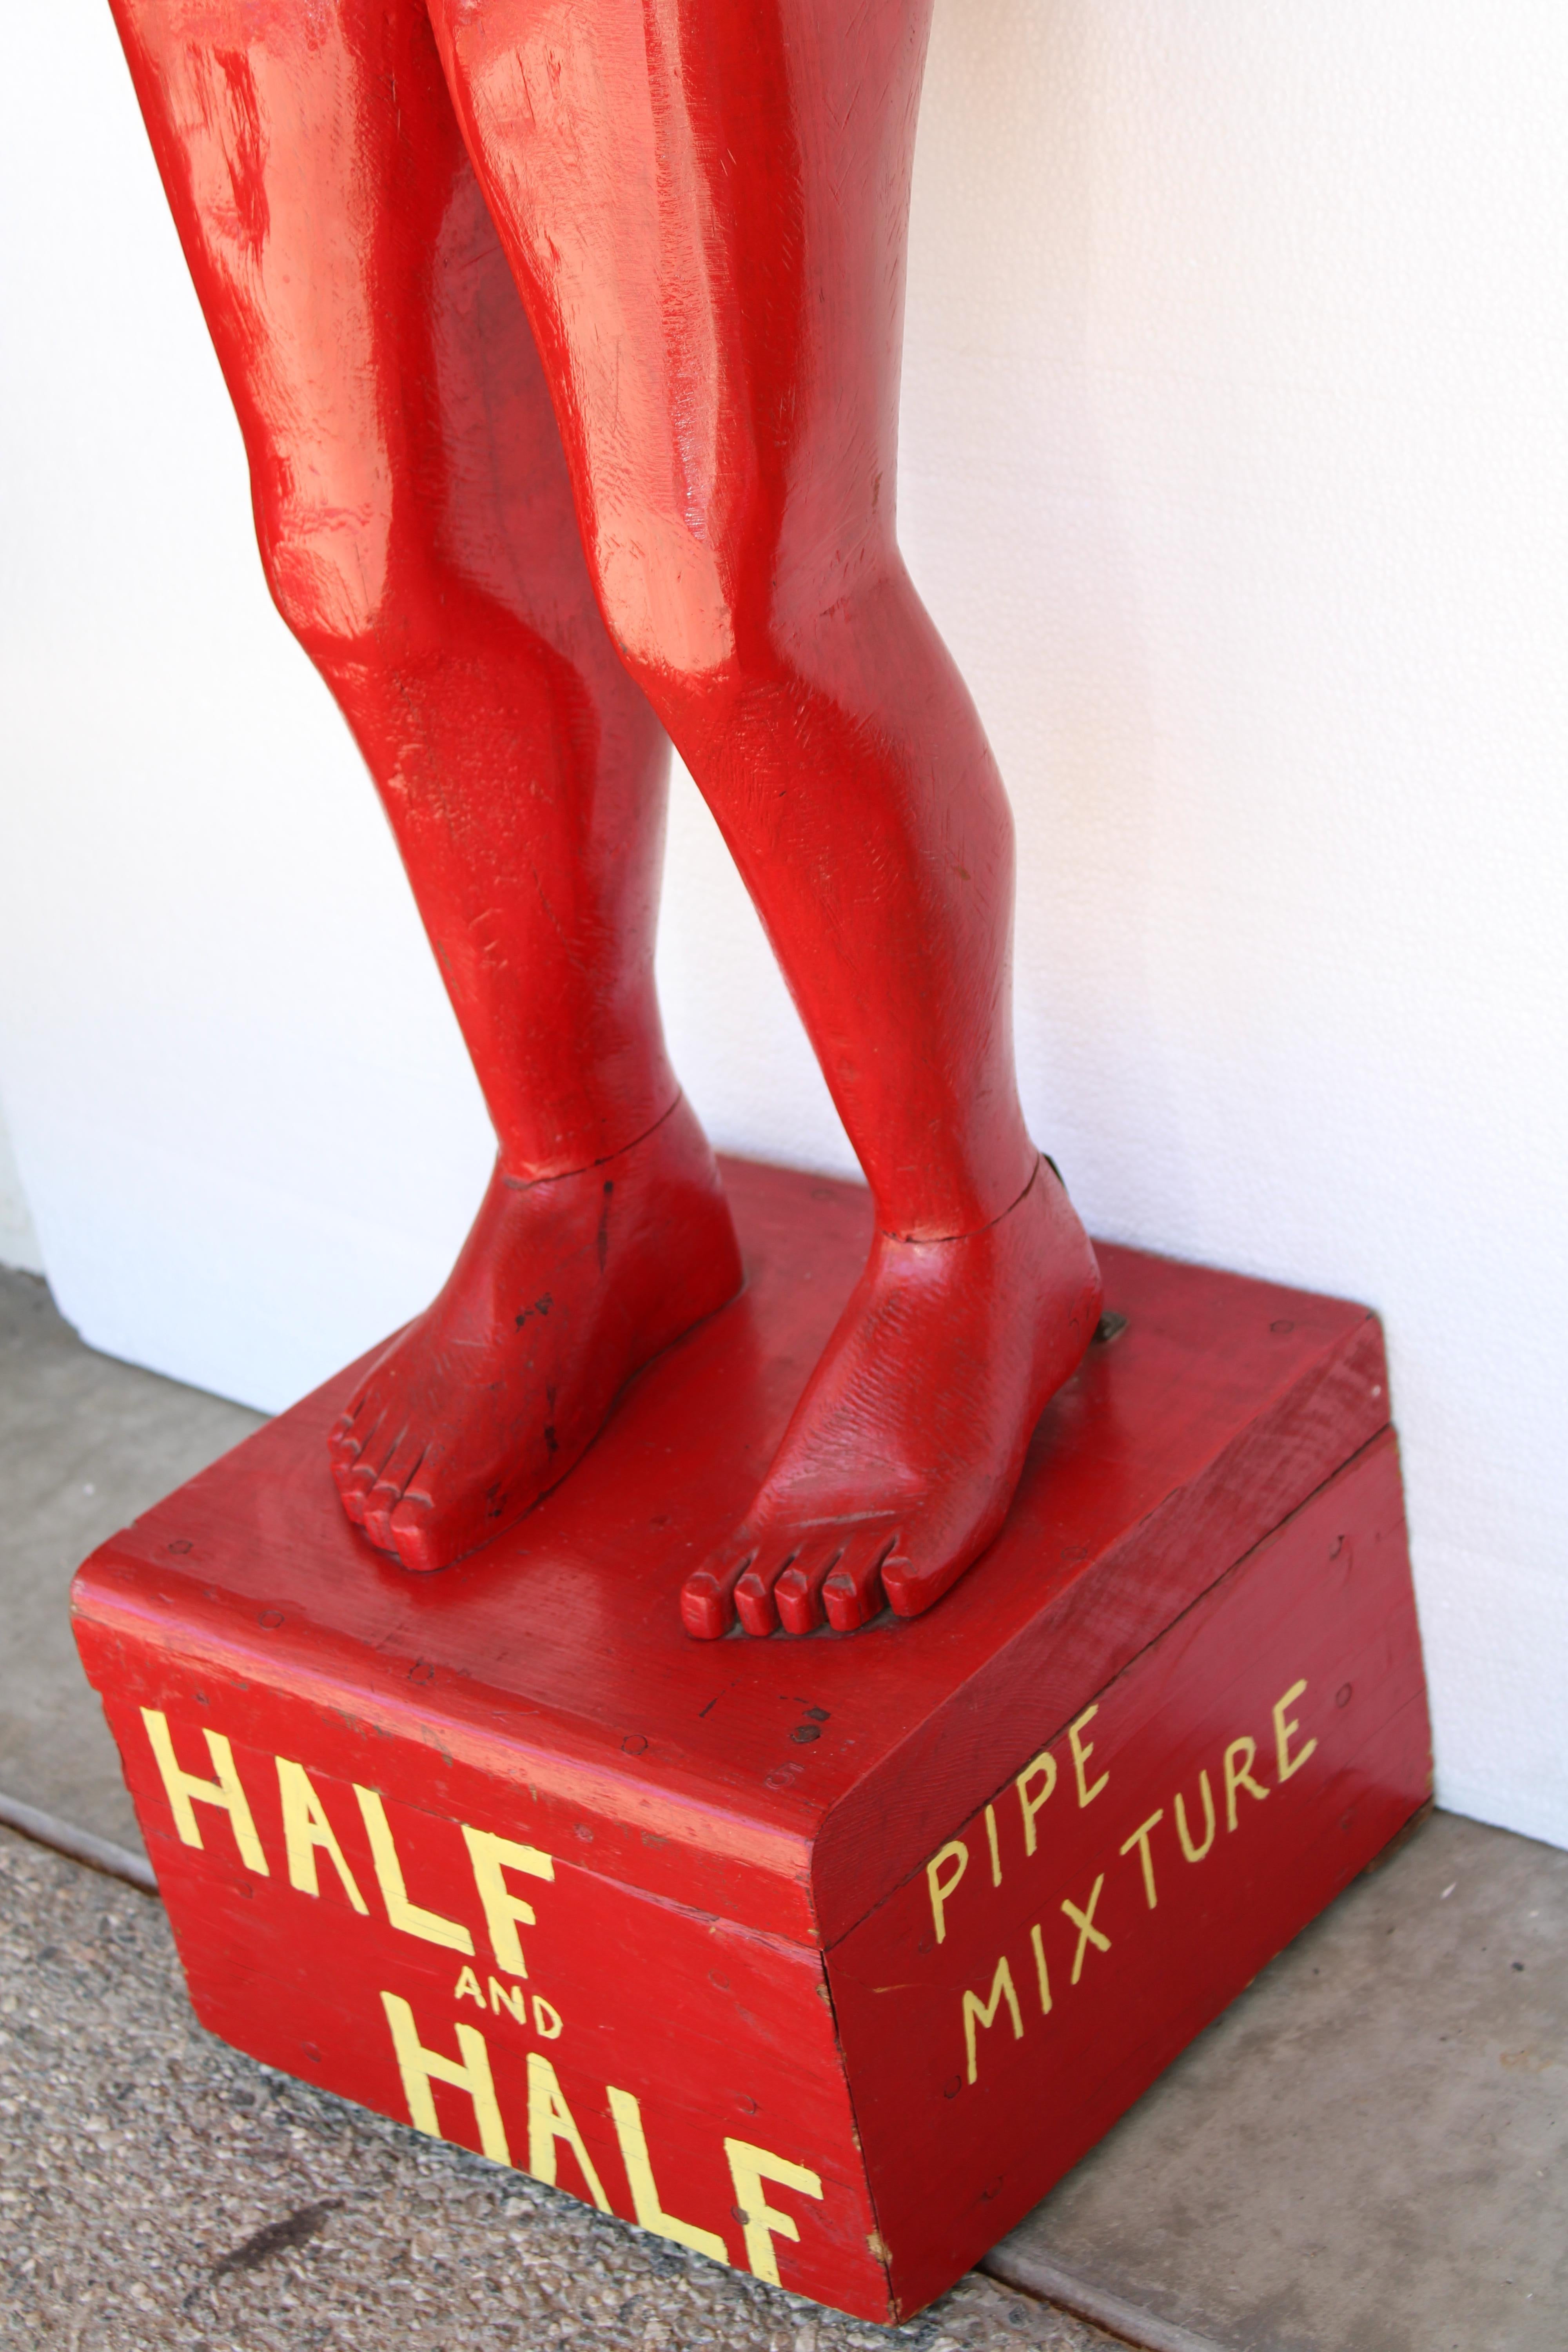 Cigar Store Statue, Half and Half Pipe Mixture For Sale 1